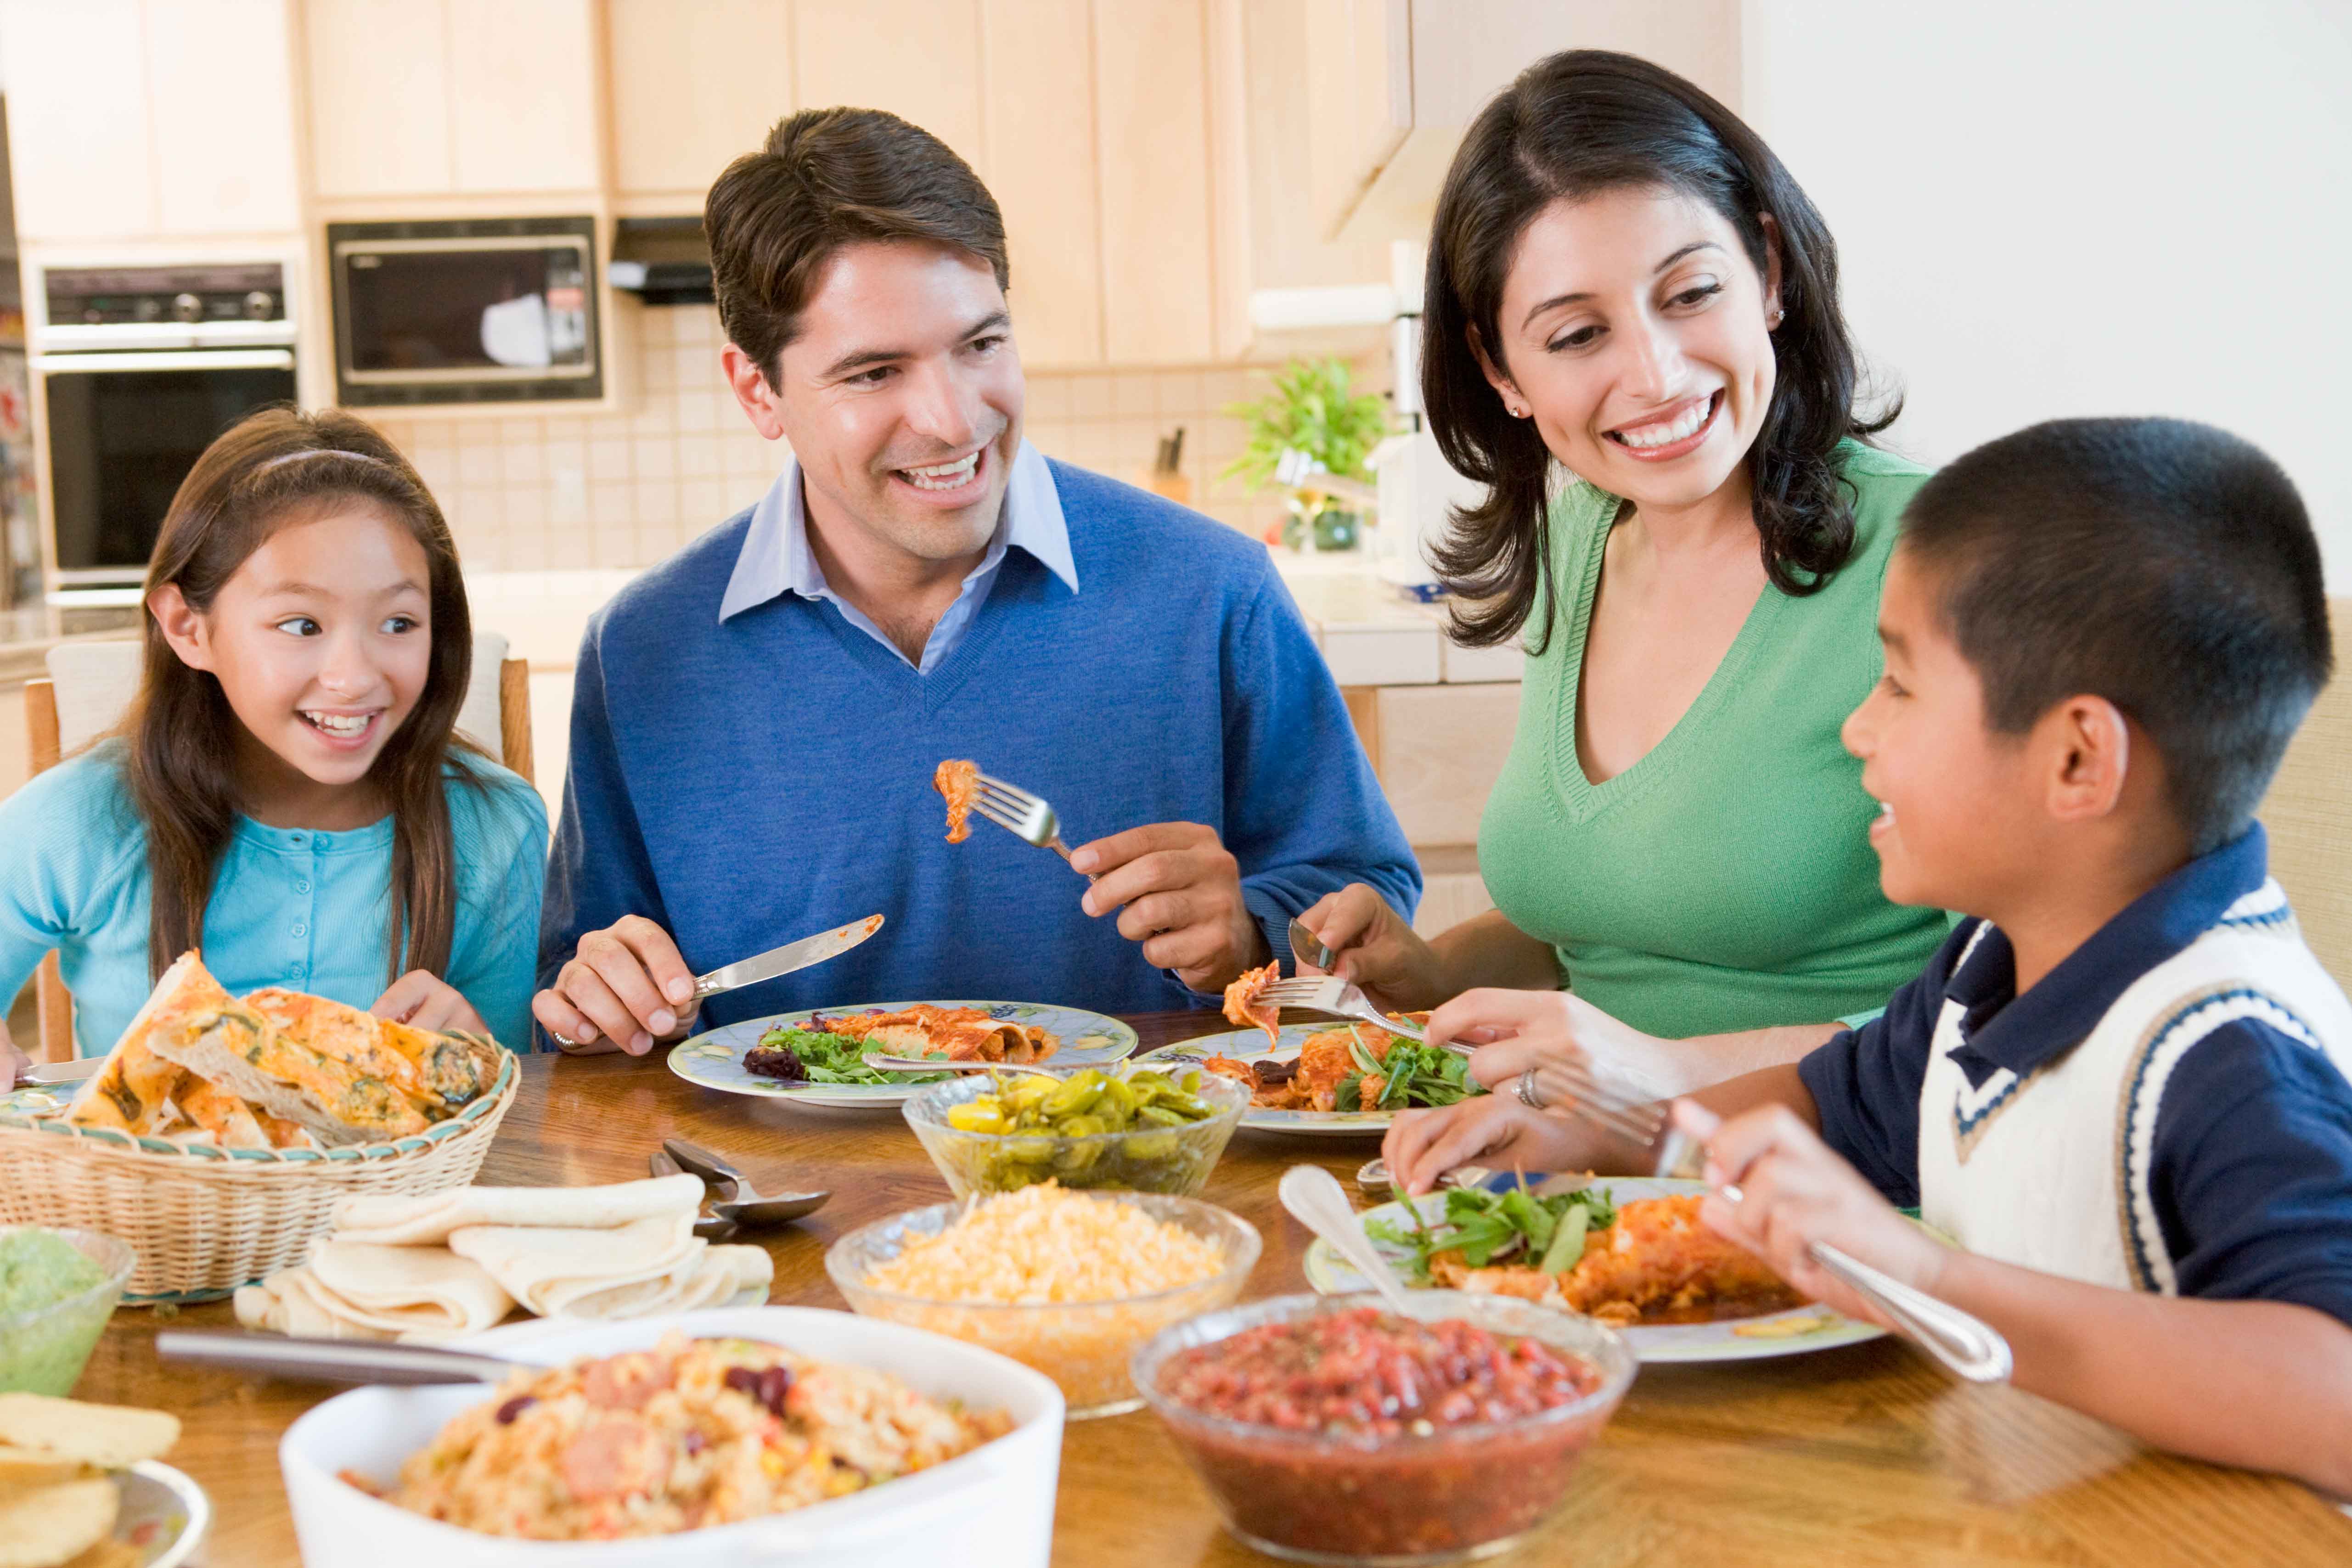 7 Things to Ask Your Kids at Dinner Beyond 